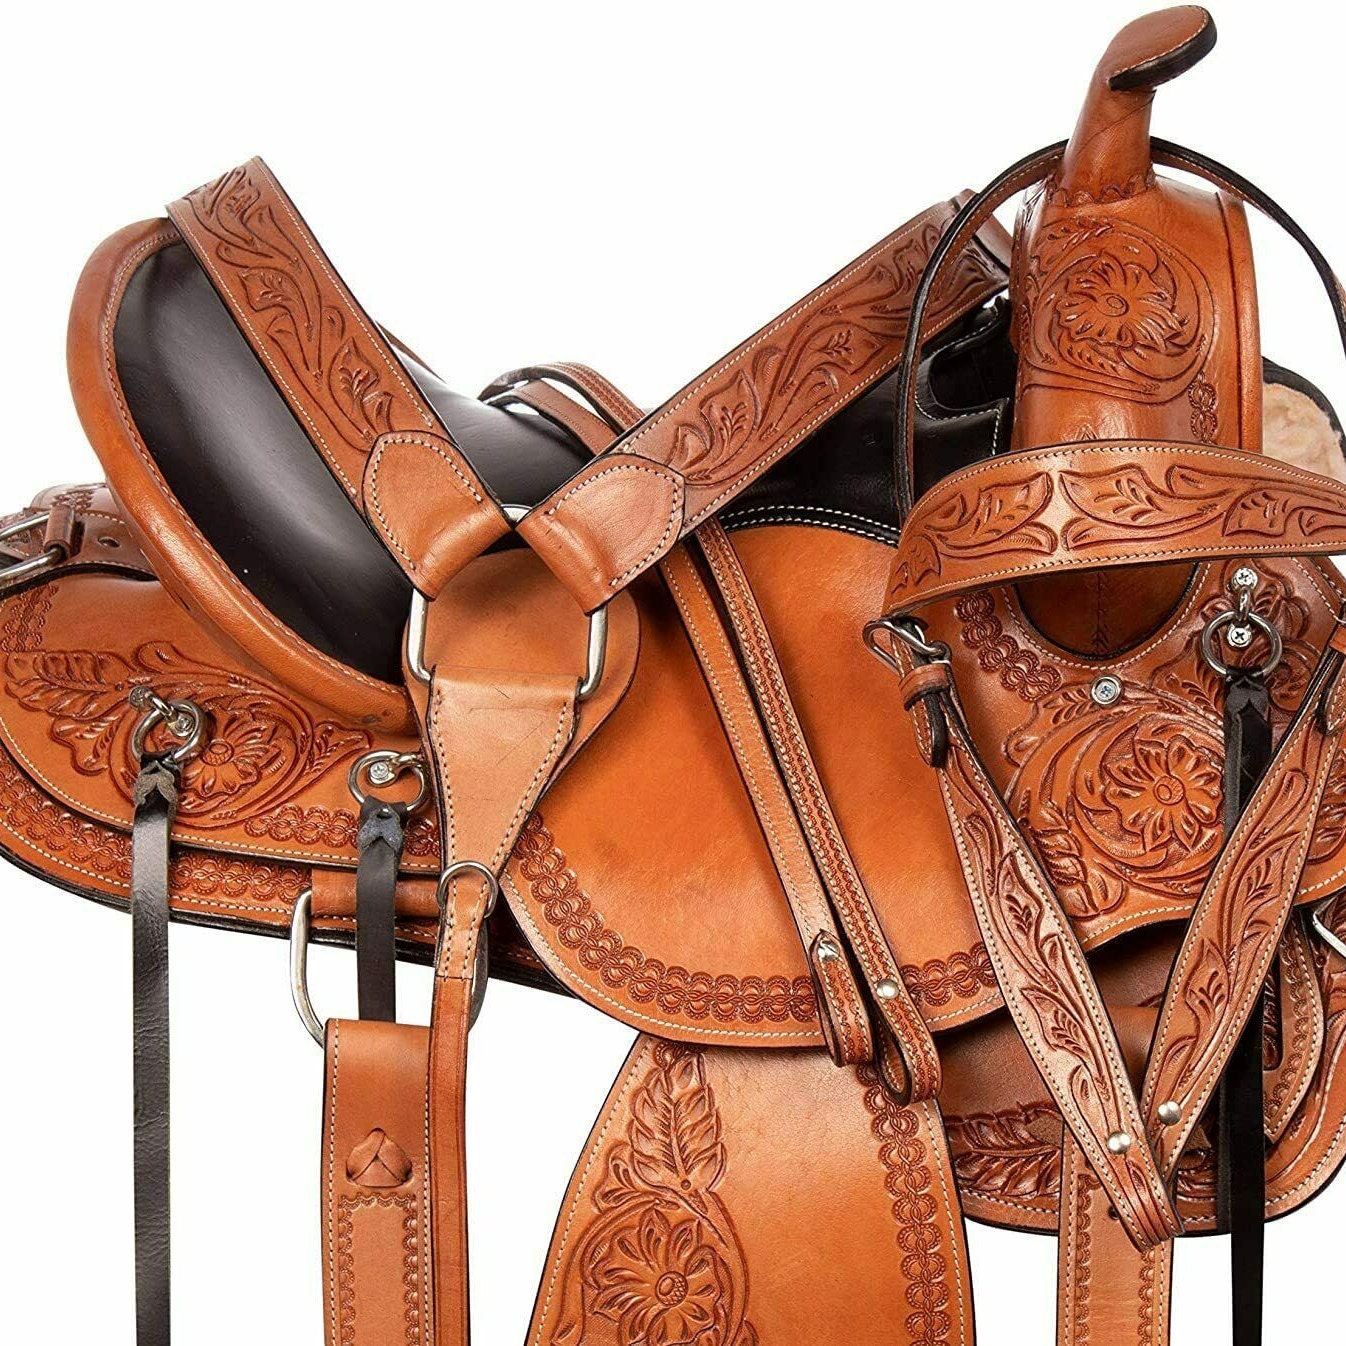 Breastplate & Reins Manaal Enterprises Size 10 11 12 14” 15” 16” 17” 18 Wade Tree A Fork Premium Western Leathe Roping Ranch Work Horse Saddle Tack Headstall 